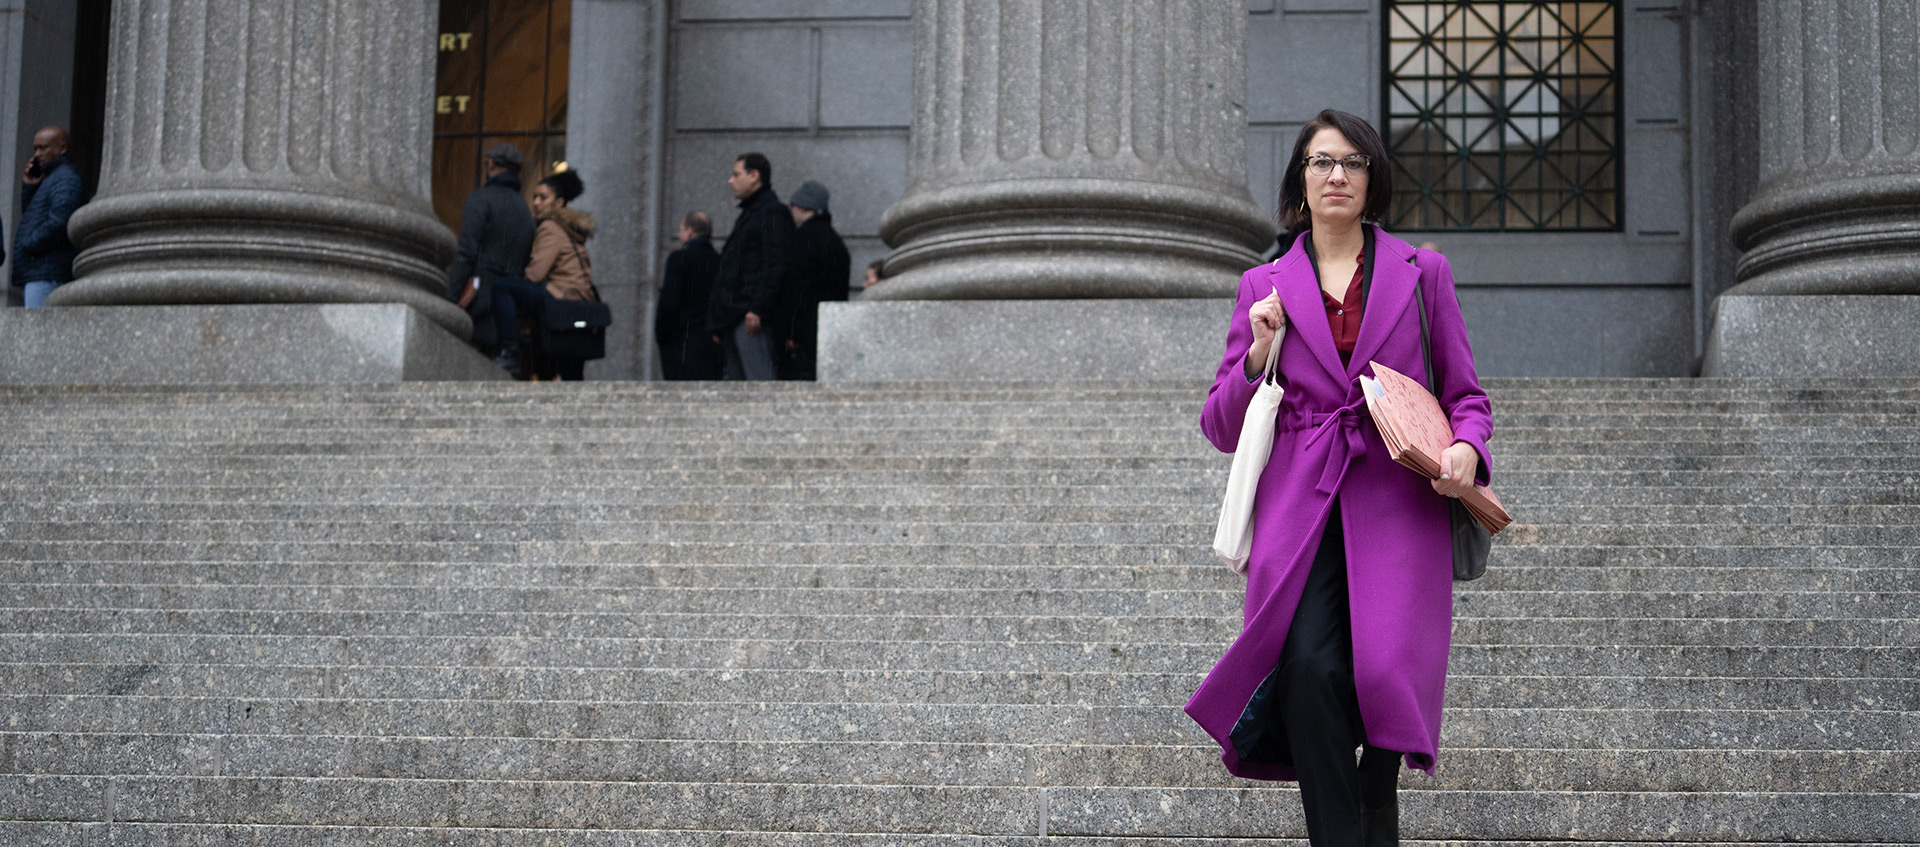 ACLU lawyer Brigitte Amiri descends a court staircase with files in hand wearing a purple coat